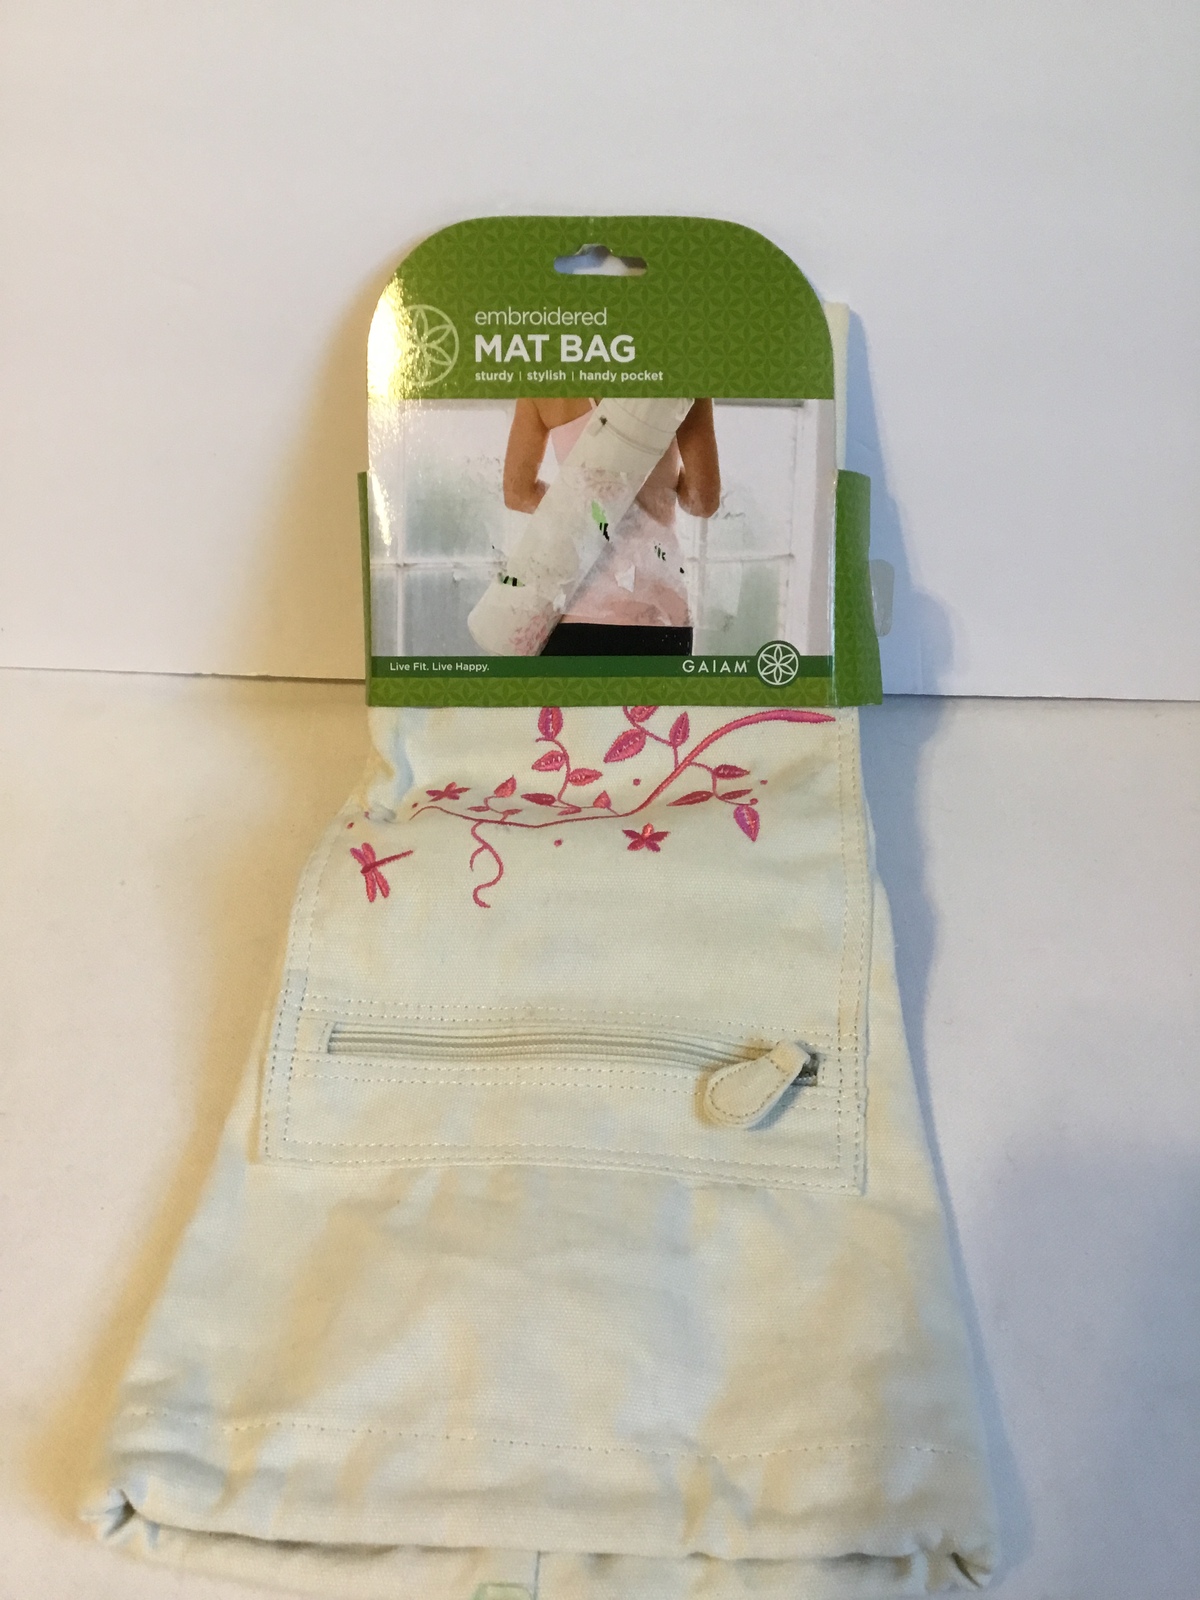 Gaiam Embroidered Yoga Mat Bag with Handy Pocket Cream White with Pink Flowers - $7.90